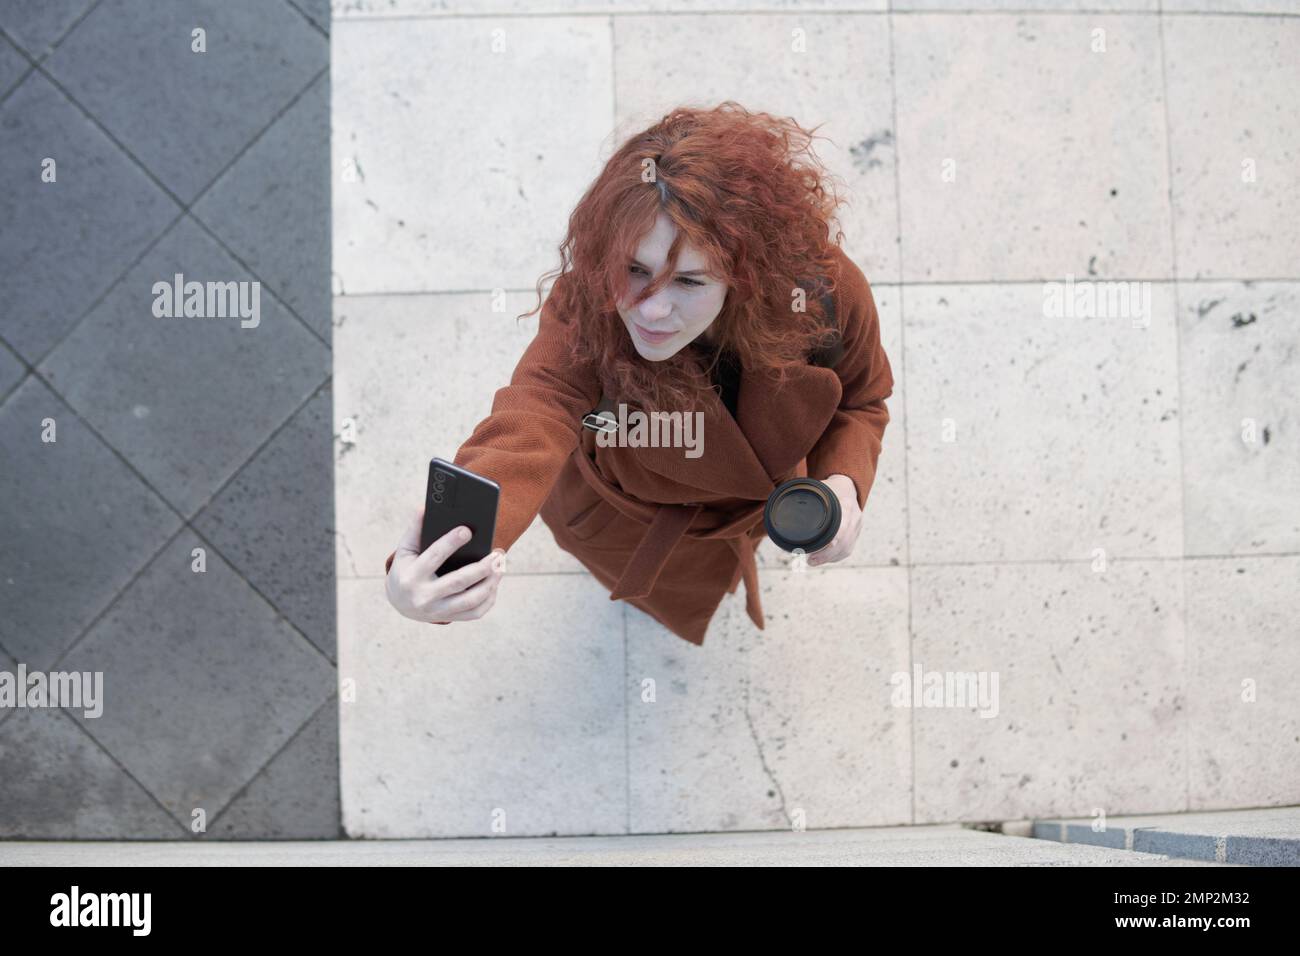 Woman seen from above taking a selfie Stock Photo